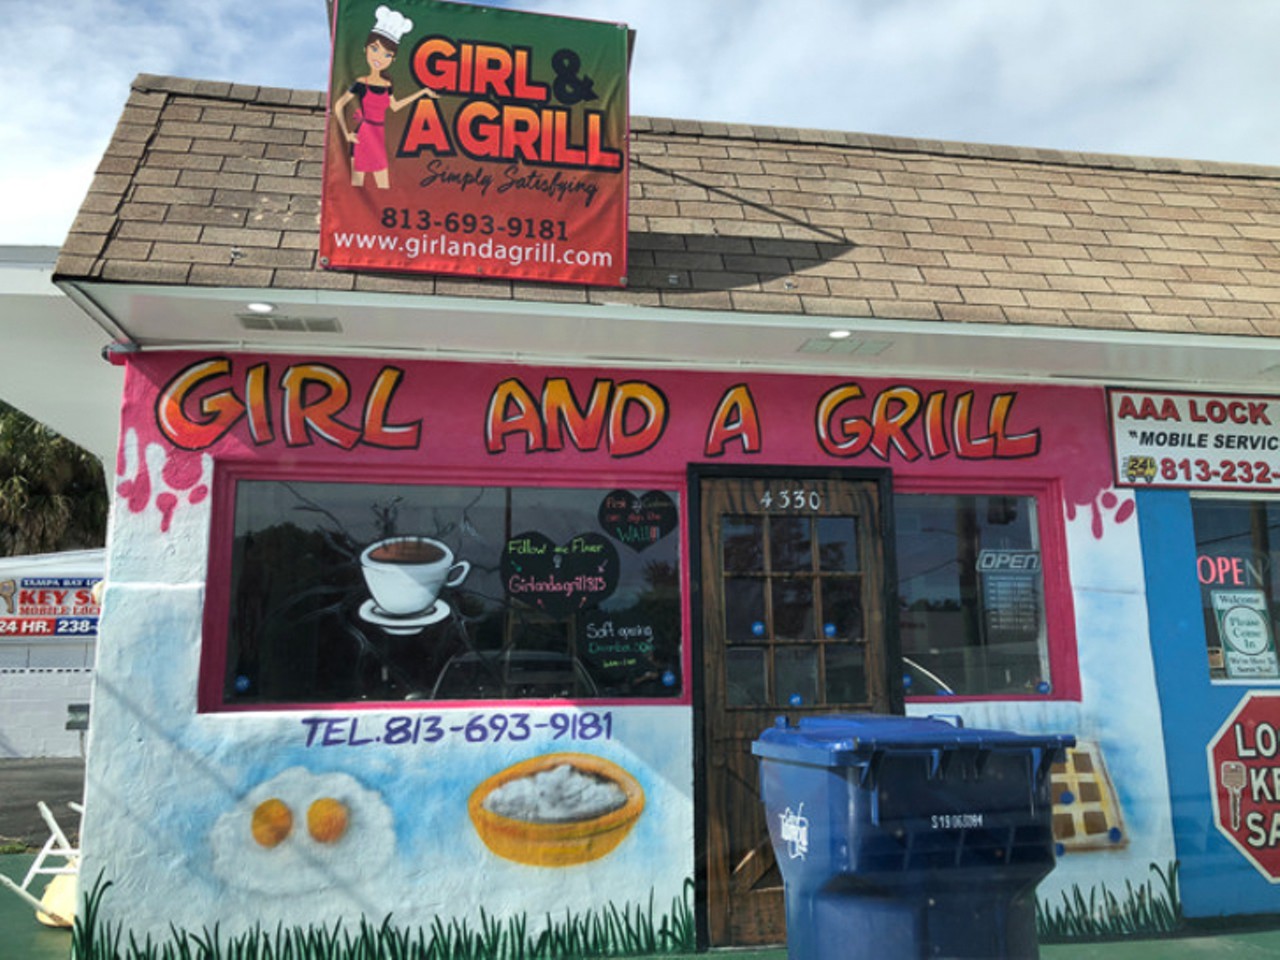  Girl And A Grill 
April Page
4330 N. Nebraska Ave., Tampa
This breakfast concept offers up traditional morning eats like specialty breakfast plates, homemade pancakes, and made-to-order omelets. Diners can also snag other bites like biscuits, grits, croissants, oatmeal, and hashbrowns.
Photo via Colin Wolf